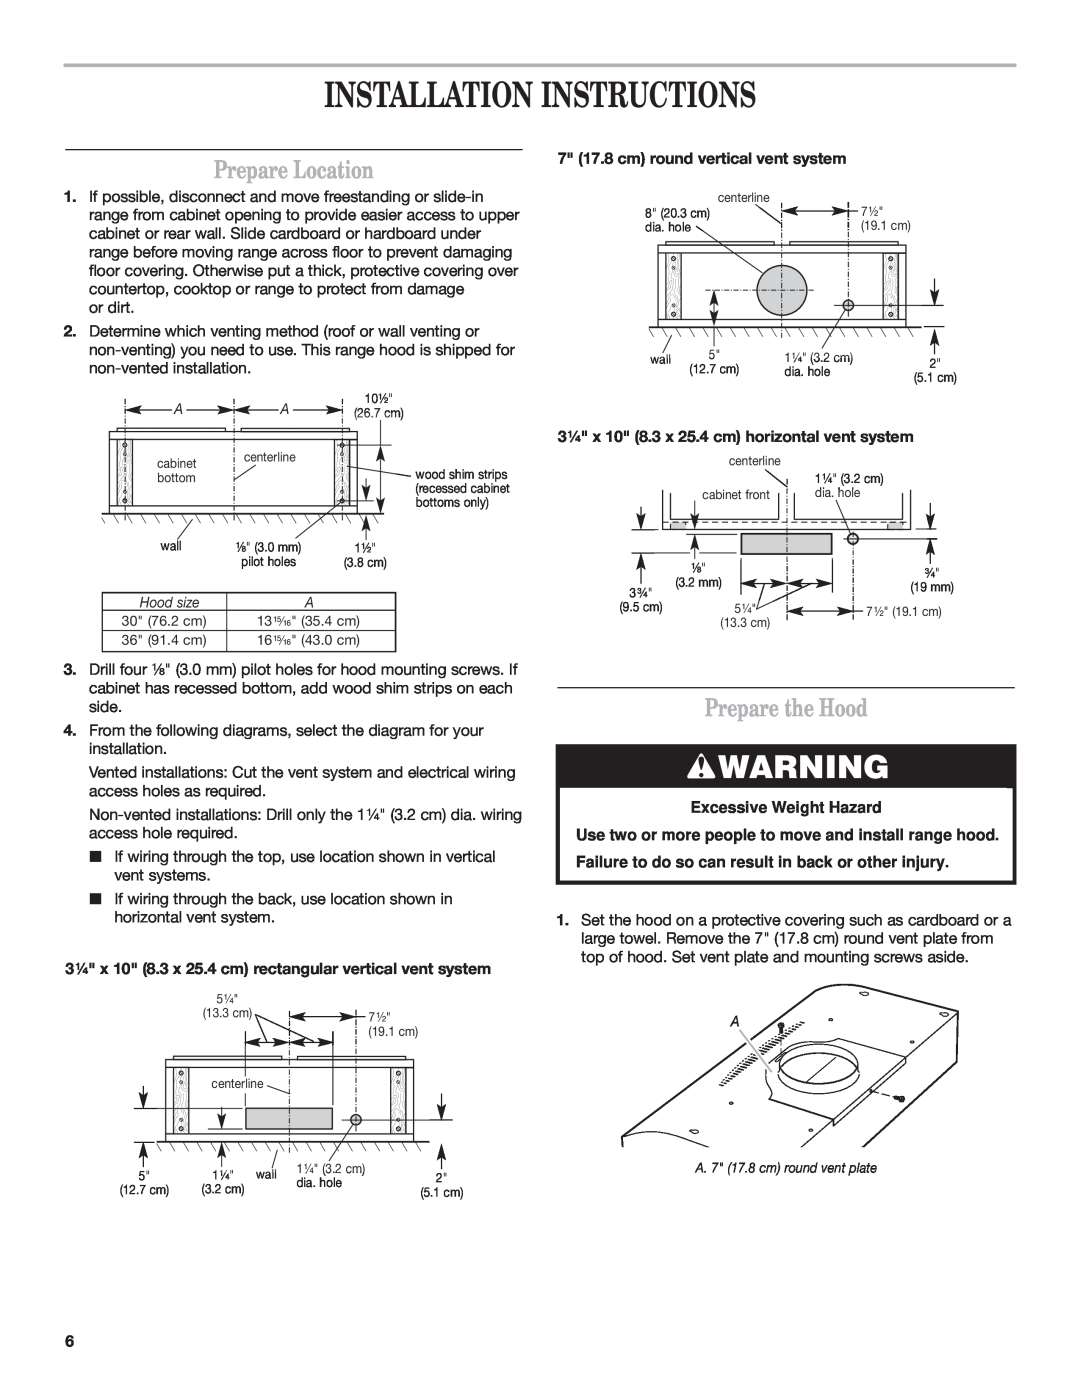 Whirlpool GZ5730XR Installation Instructions, Prepare Location, Prepare the Hood, 7 17.8 cm round vertical vent system 